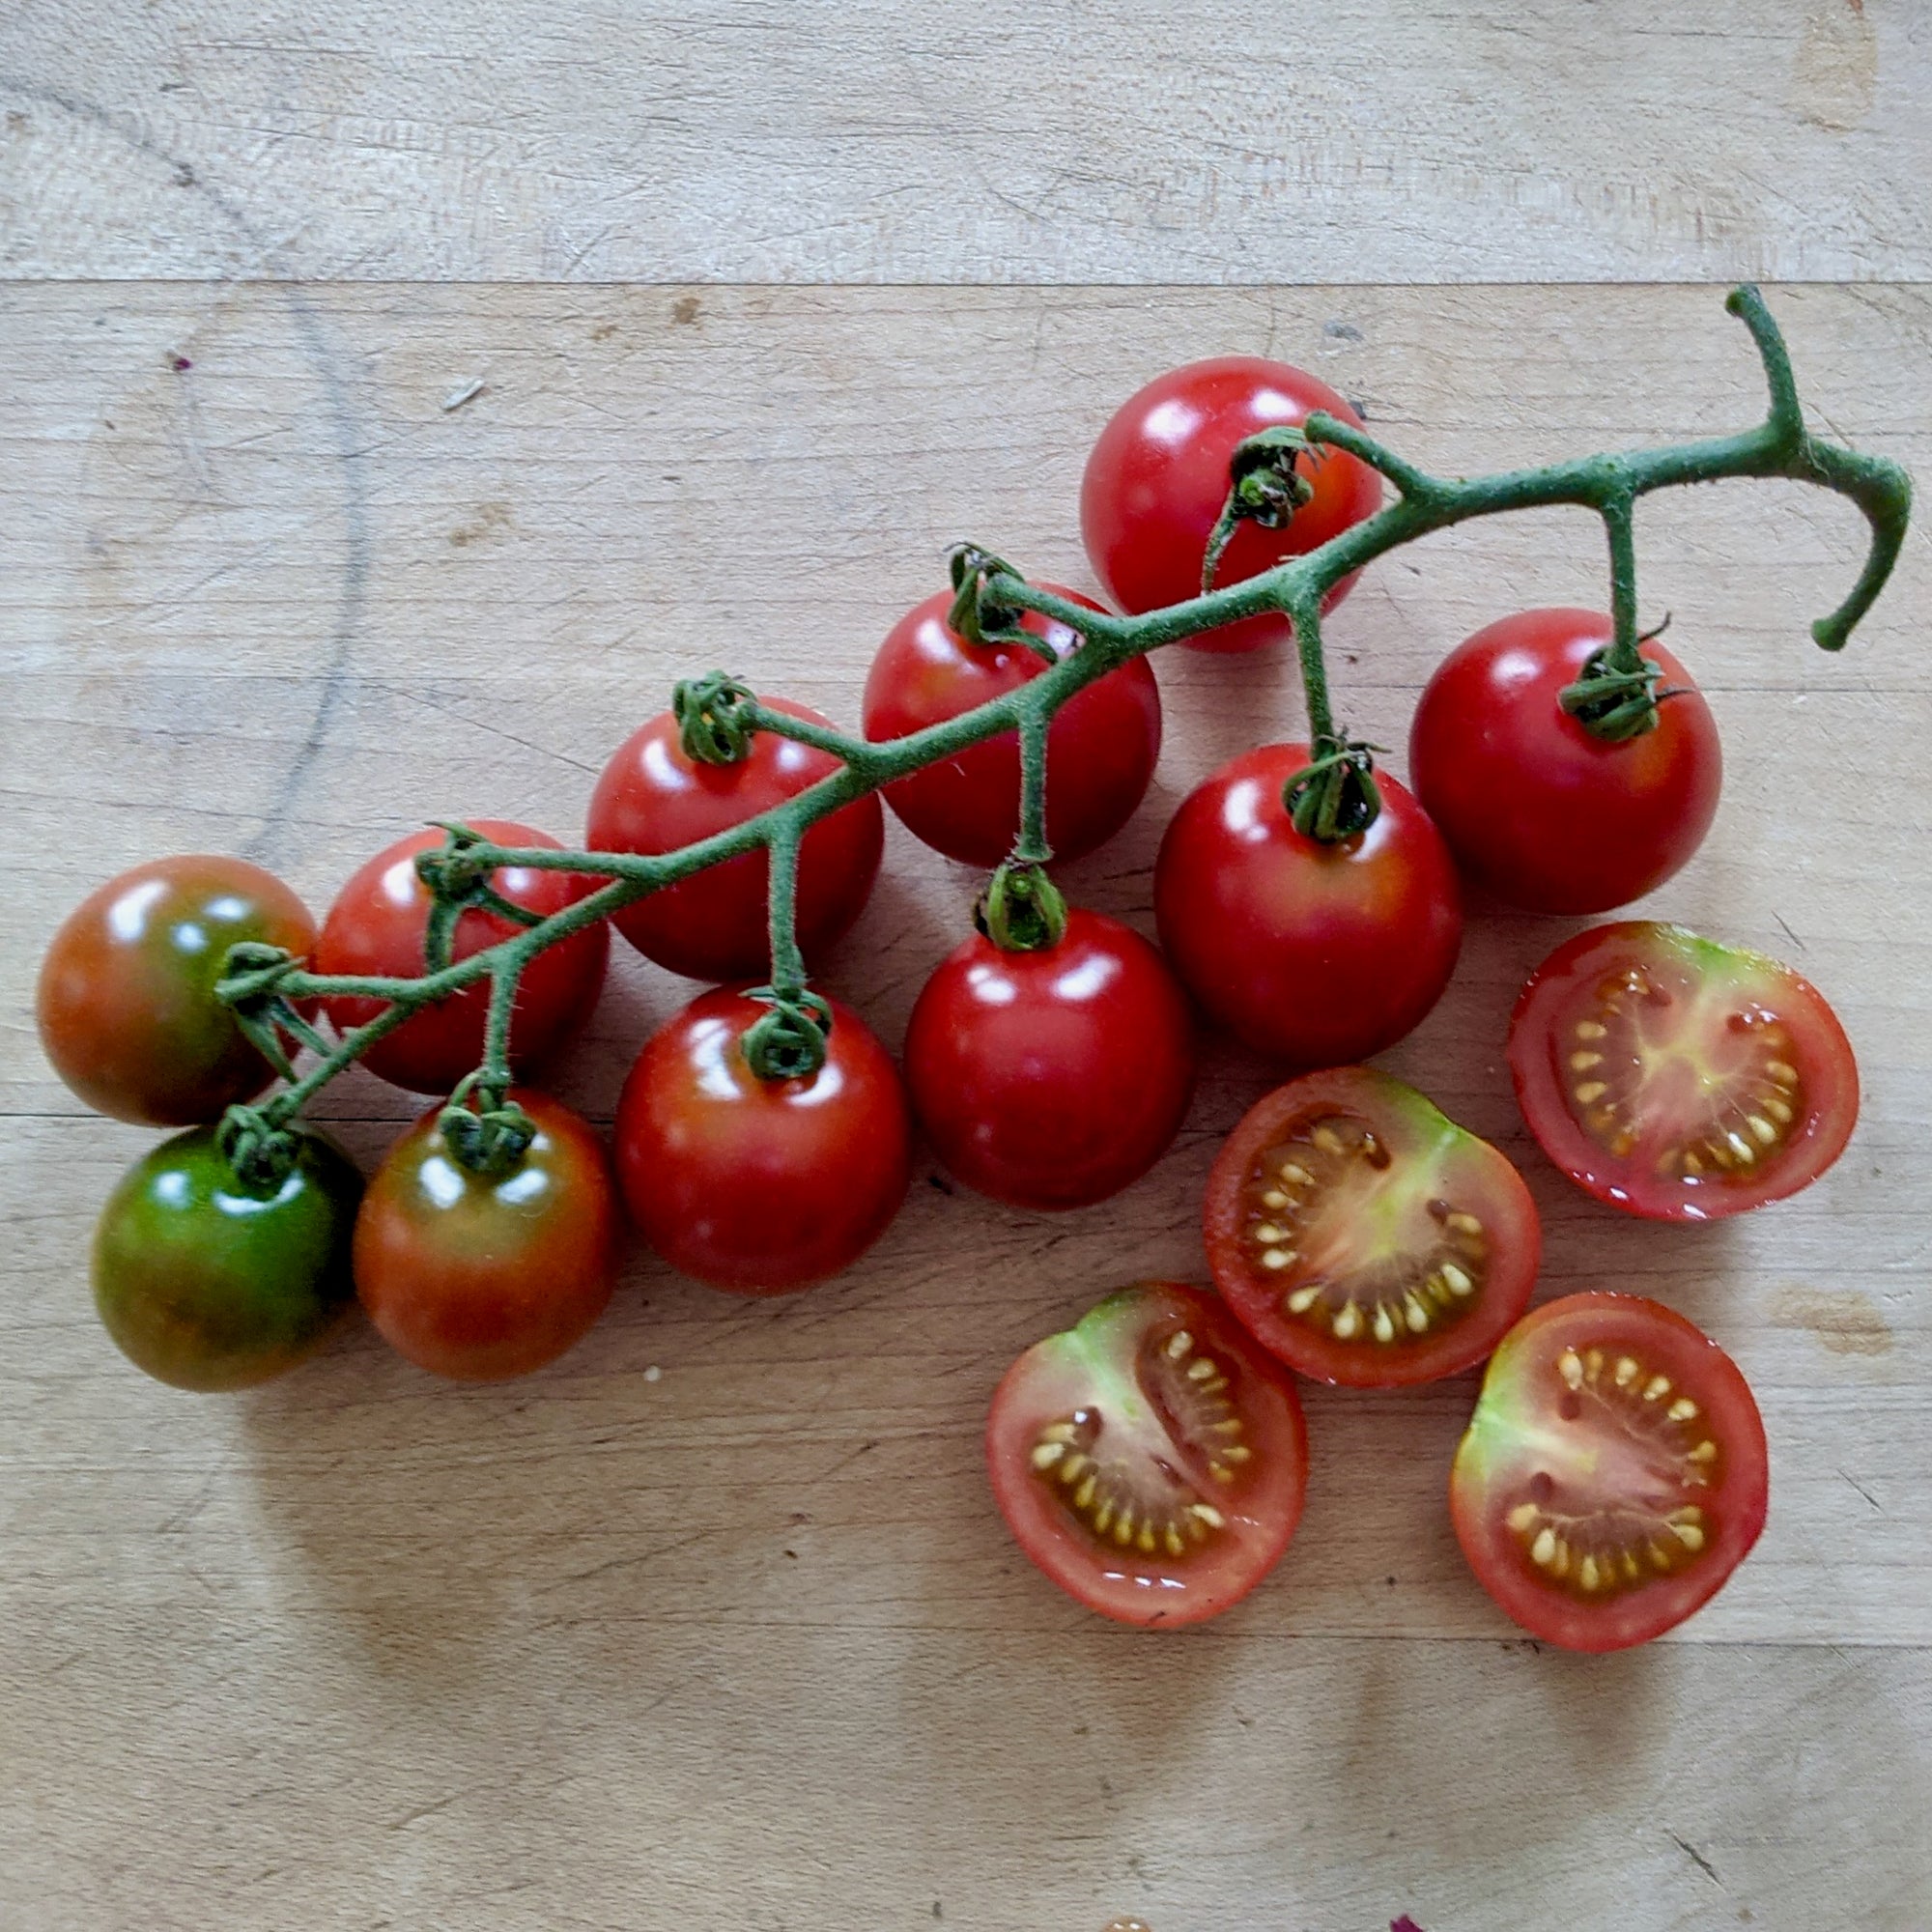 Be My Baby Cherry Tomatoes on cutting board